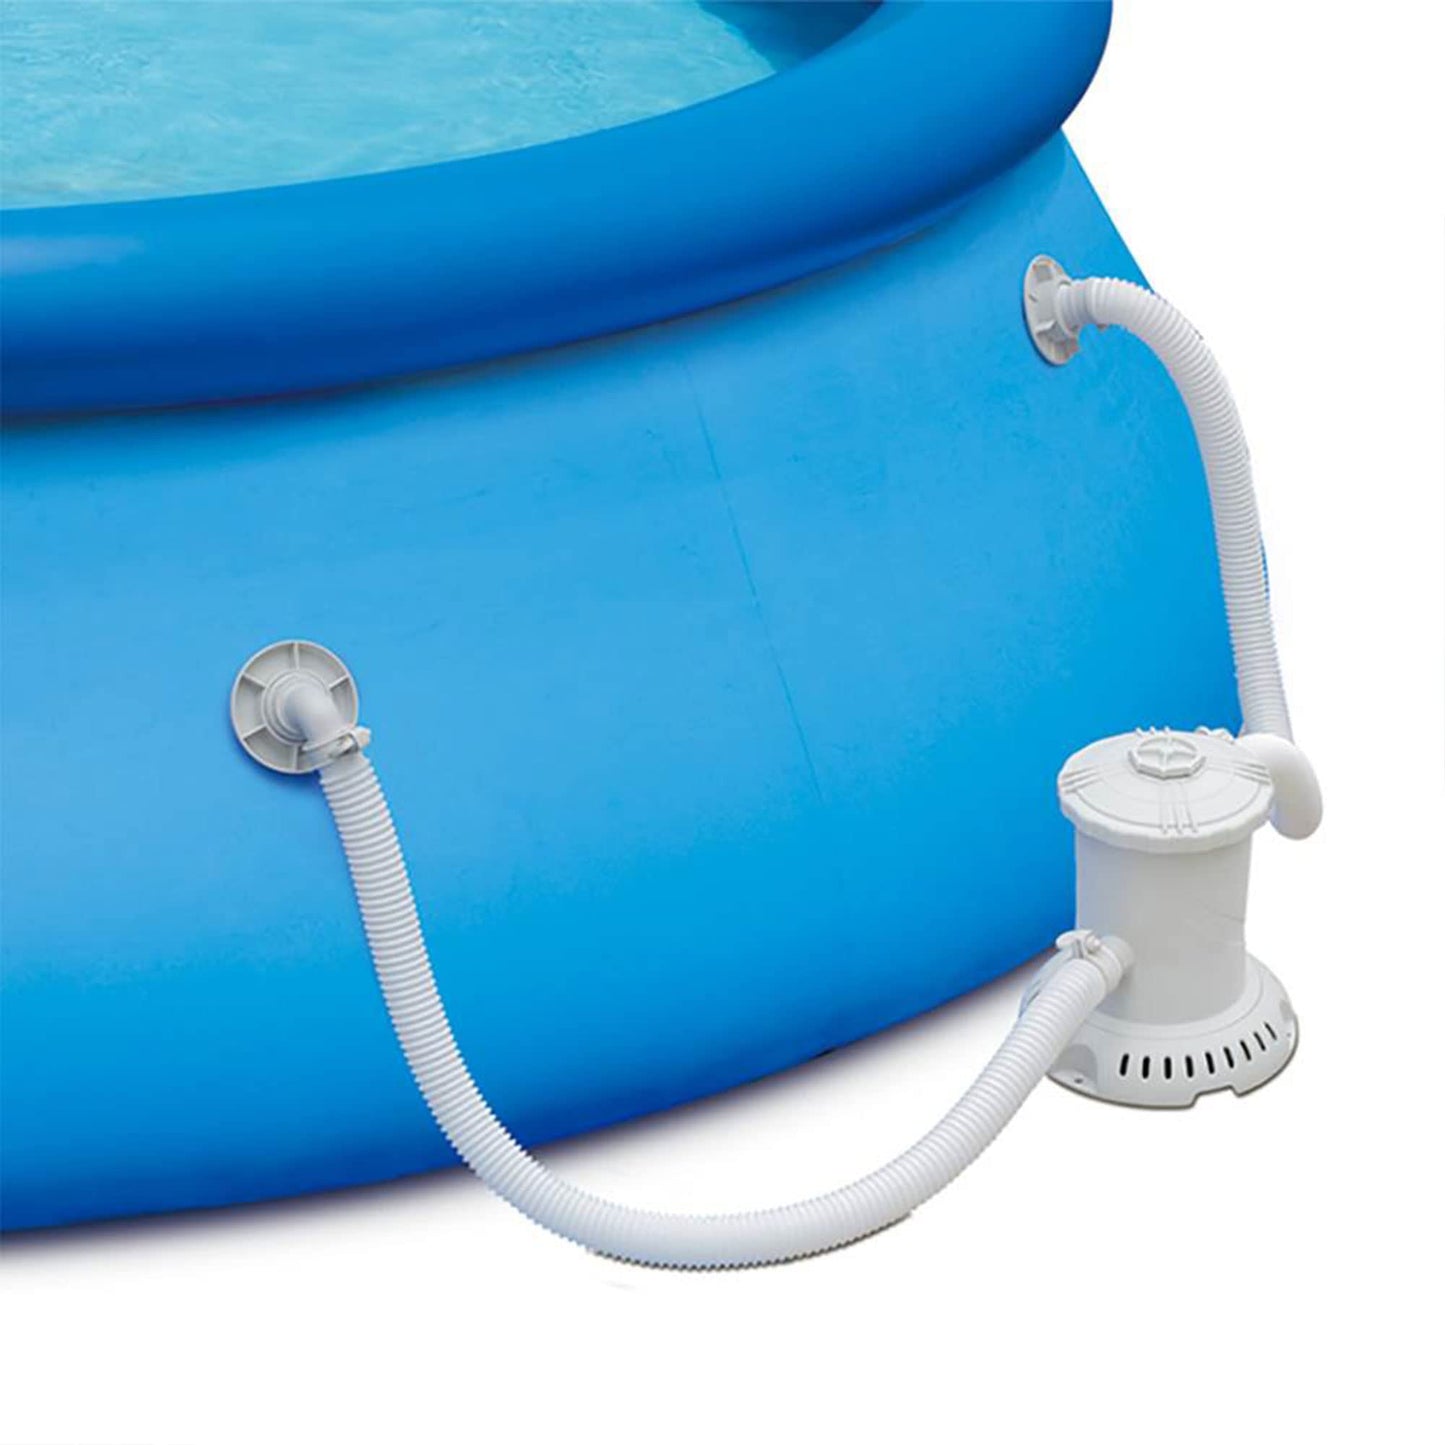 Summer Waves Quick Set Inflatable Pool with Filter Pump, 15' x 36"